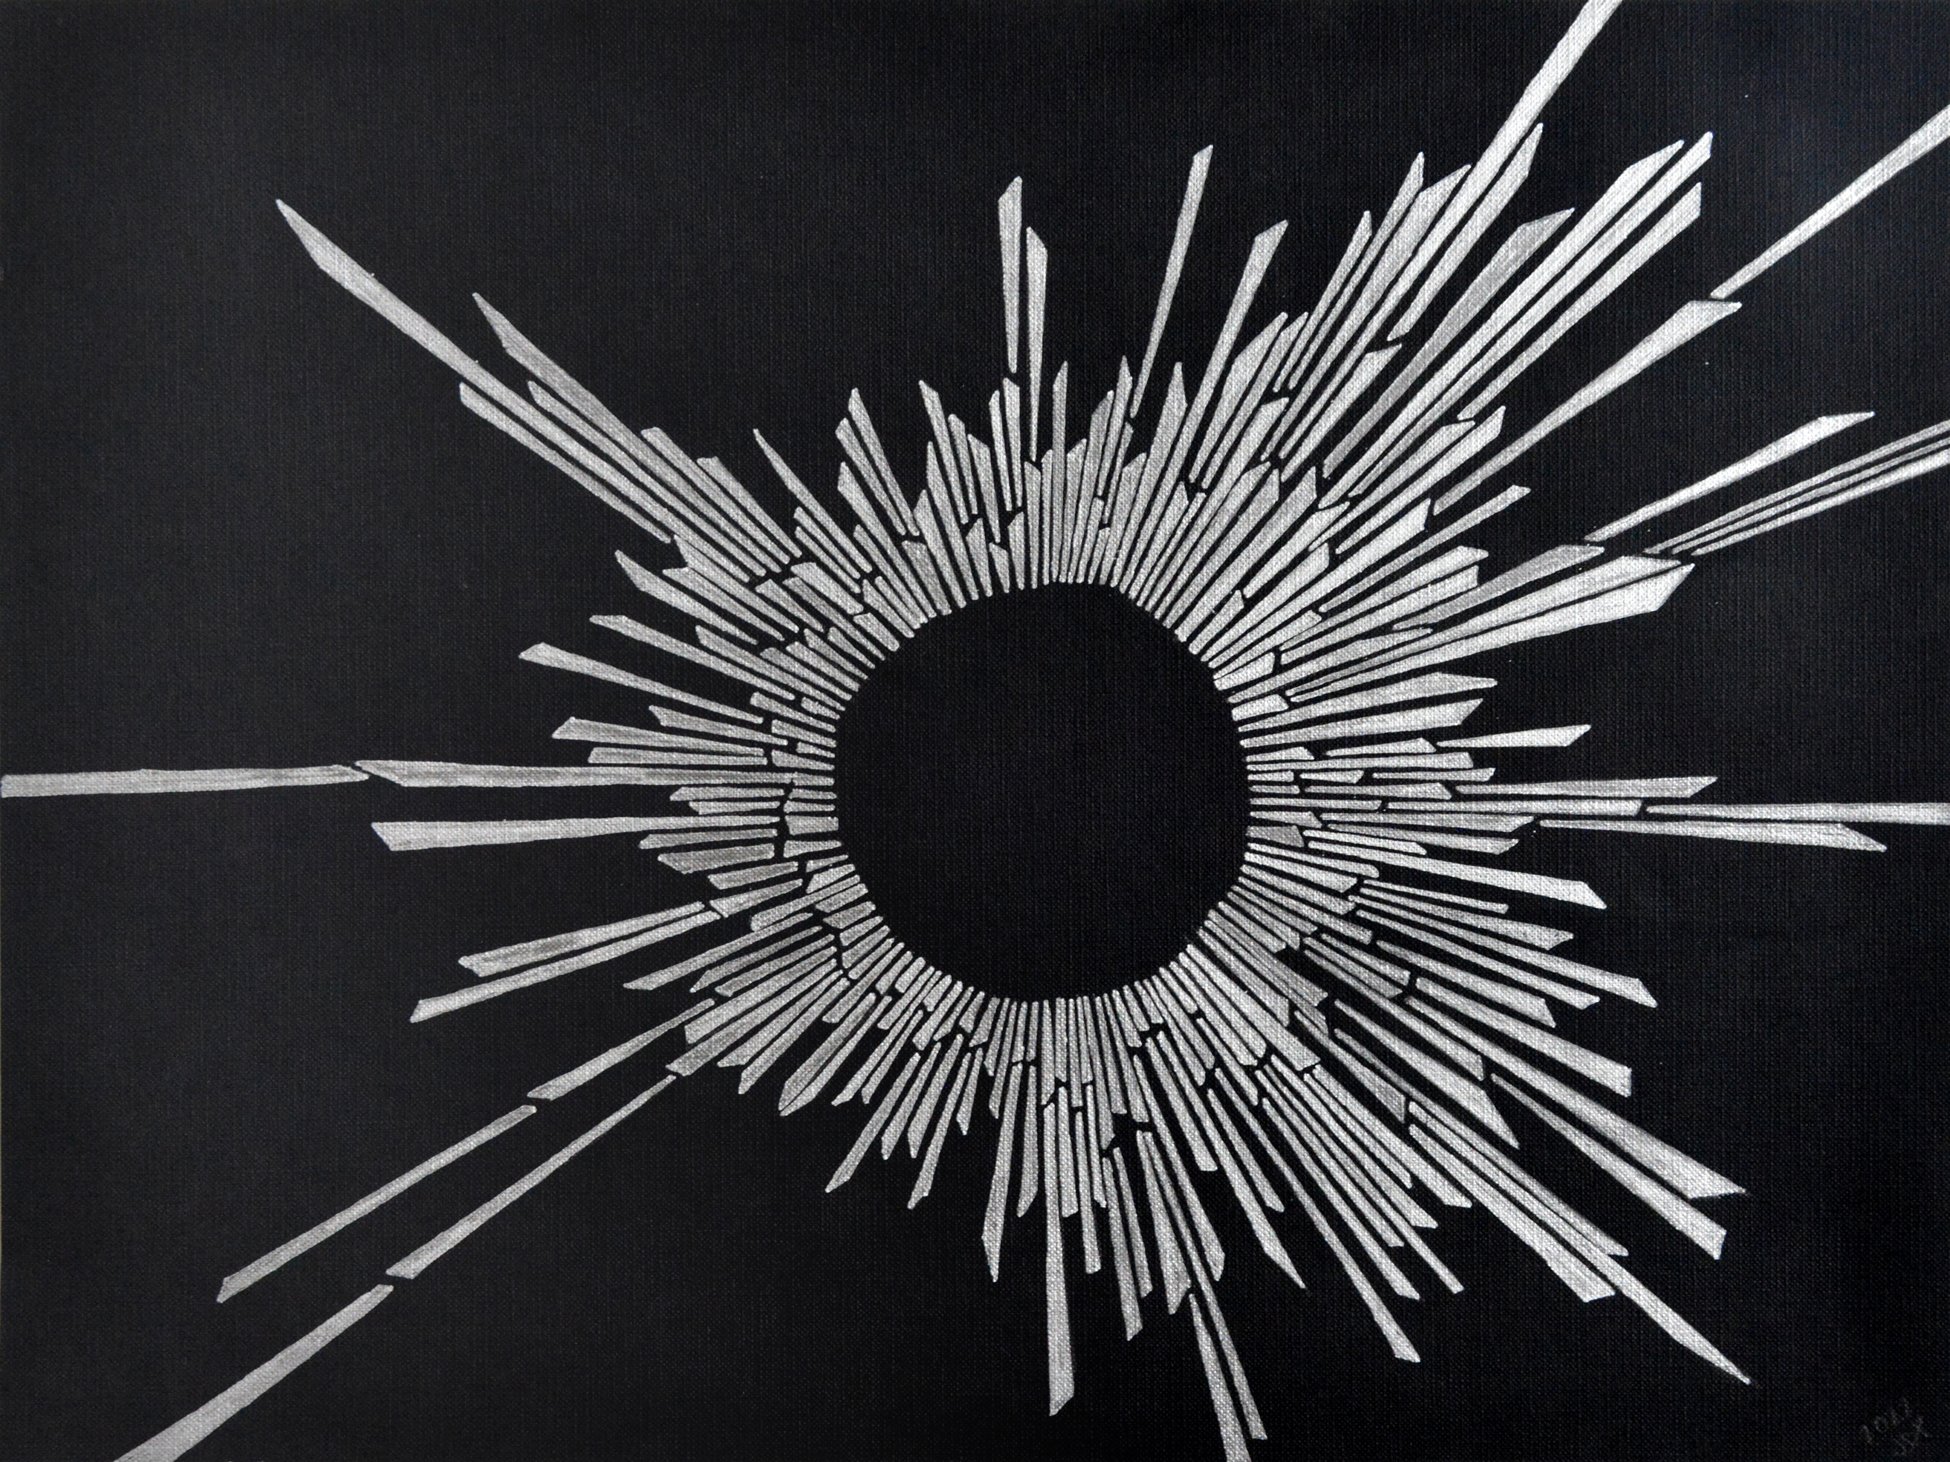 Burst 1, 2022, Metallic ink on black paper, 12 inches x 16 inches, $350